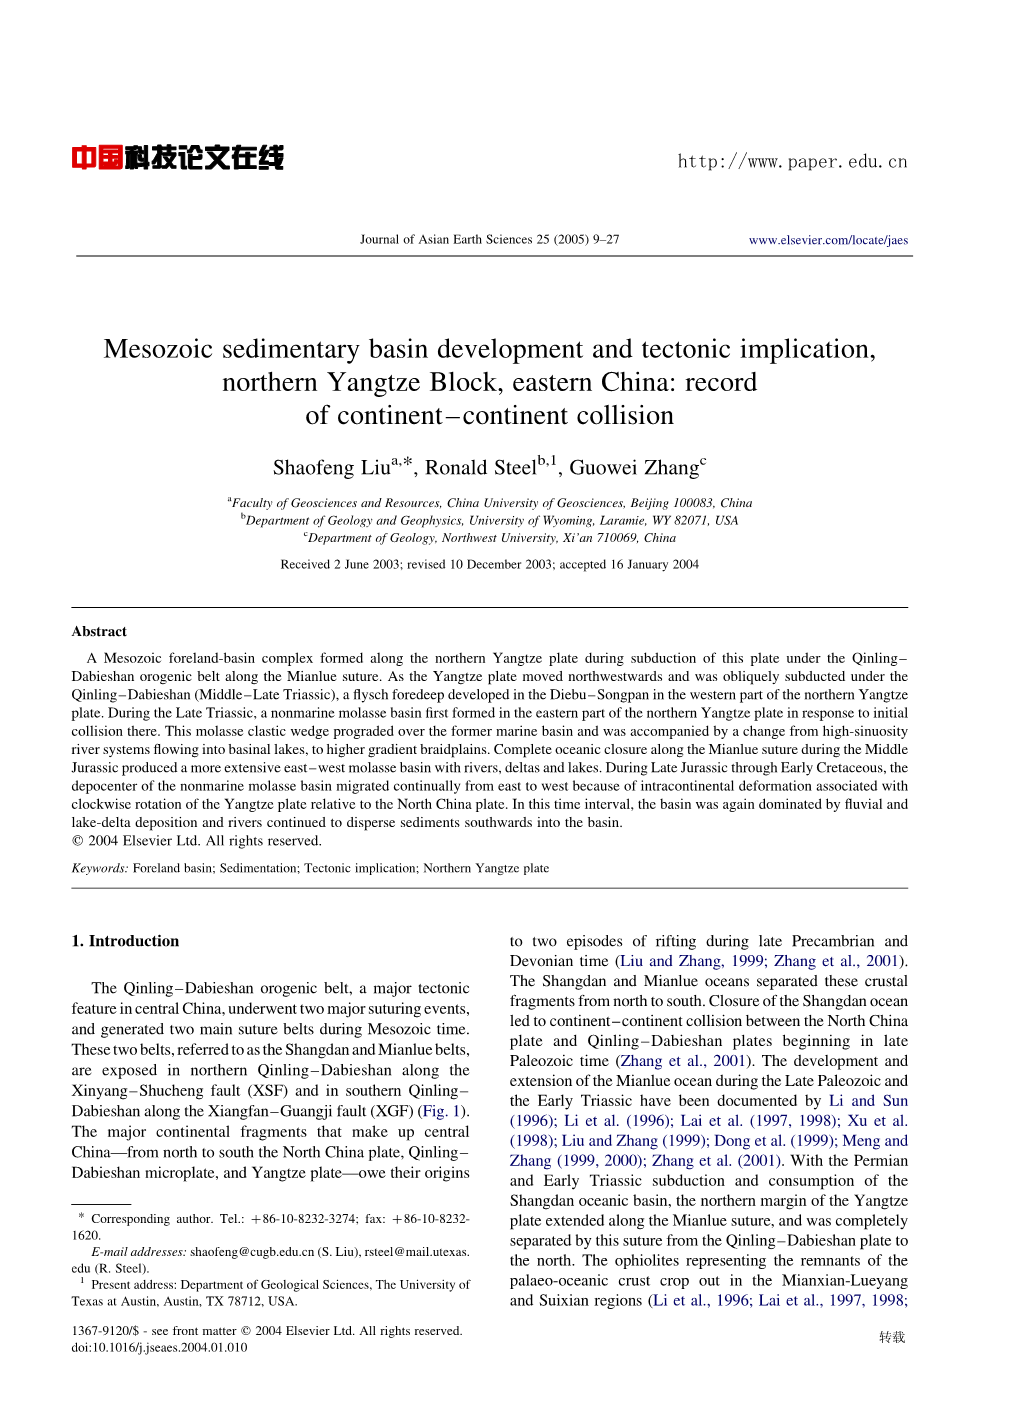 Mesozoic Sedimentary Basin Development and Tectonic Implication, Northern Yangtze Block, Eastern China: Record of Continent–Continent Collision